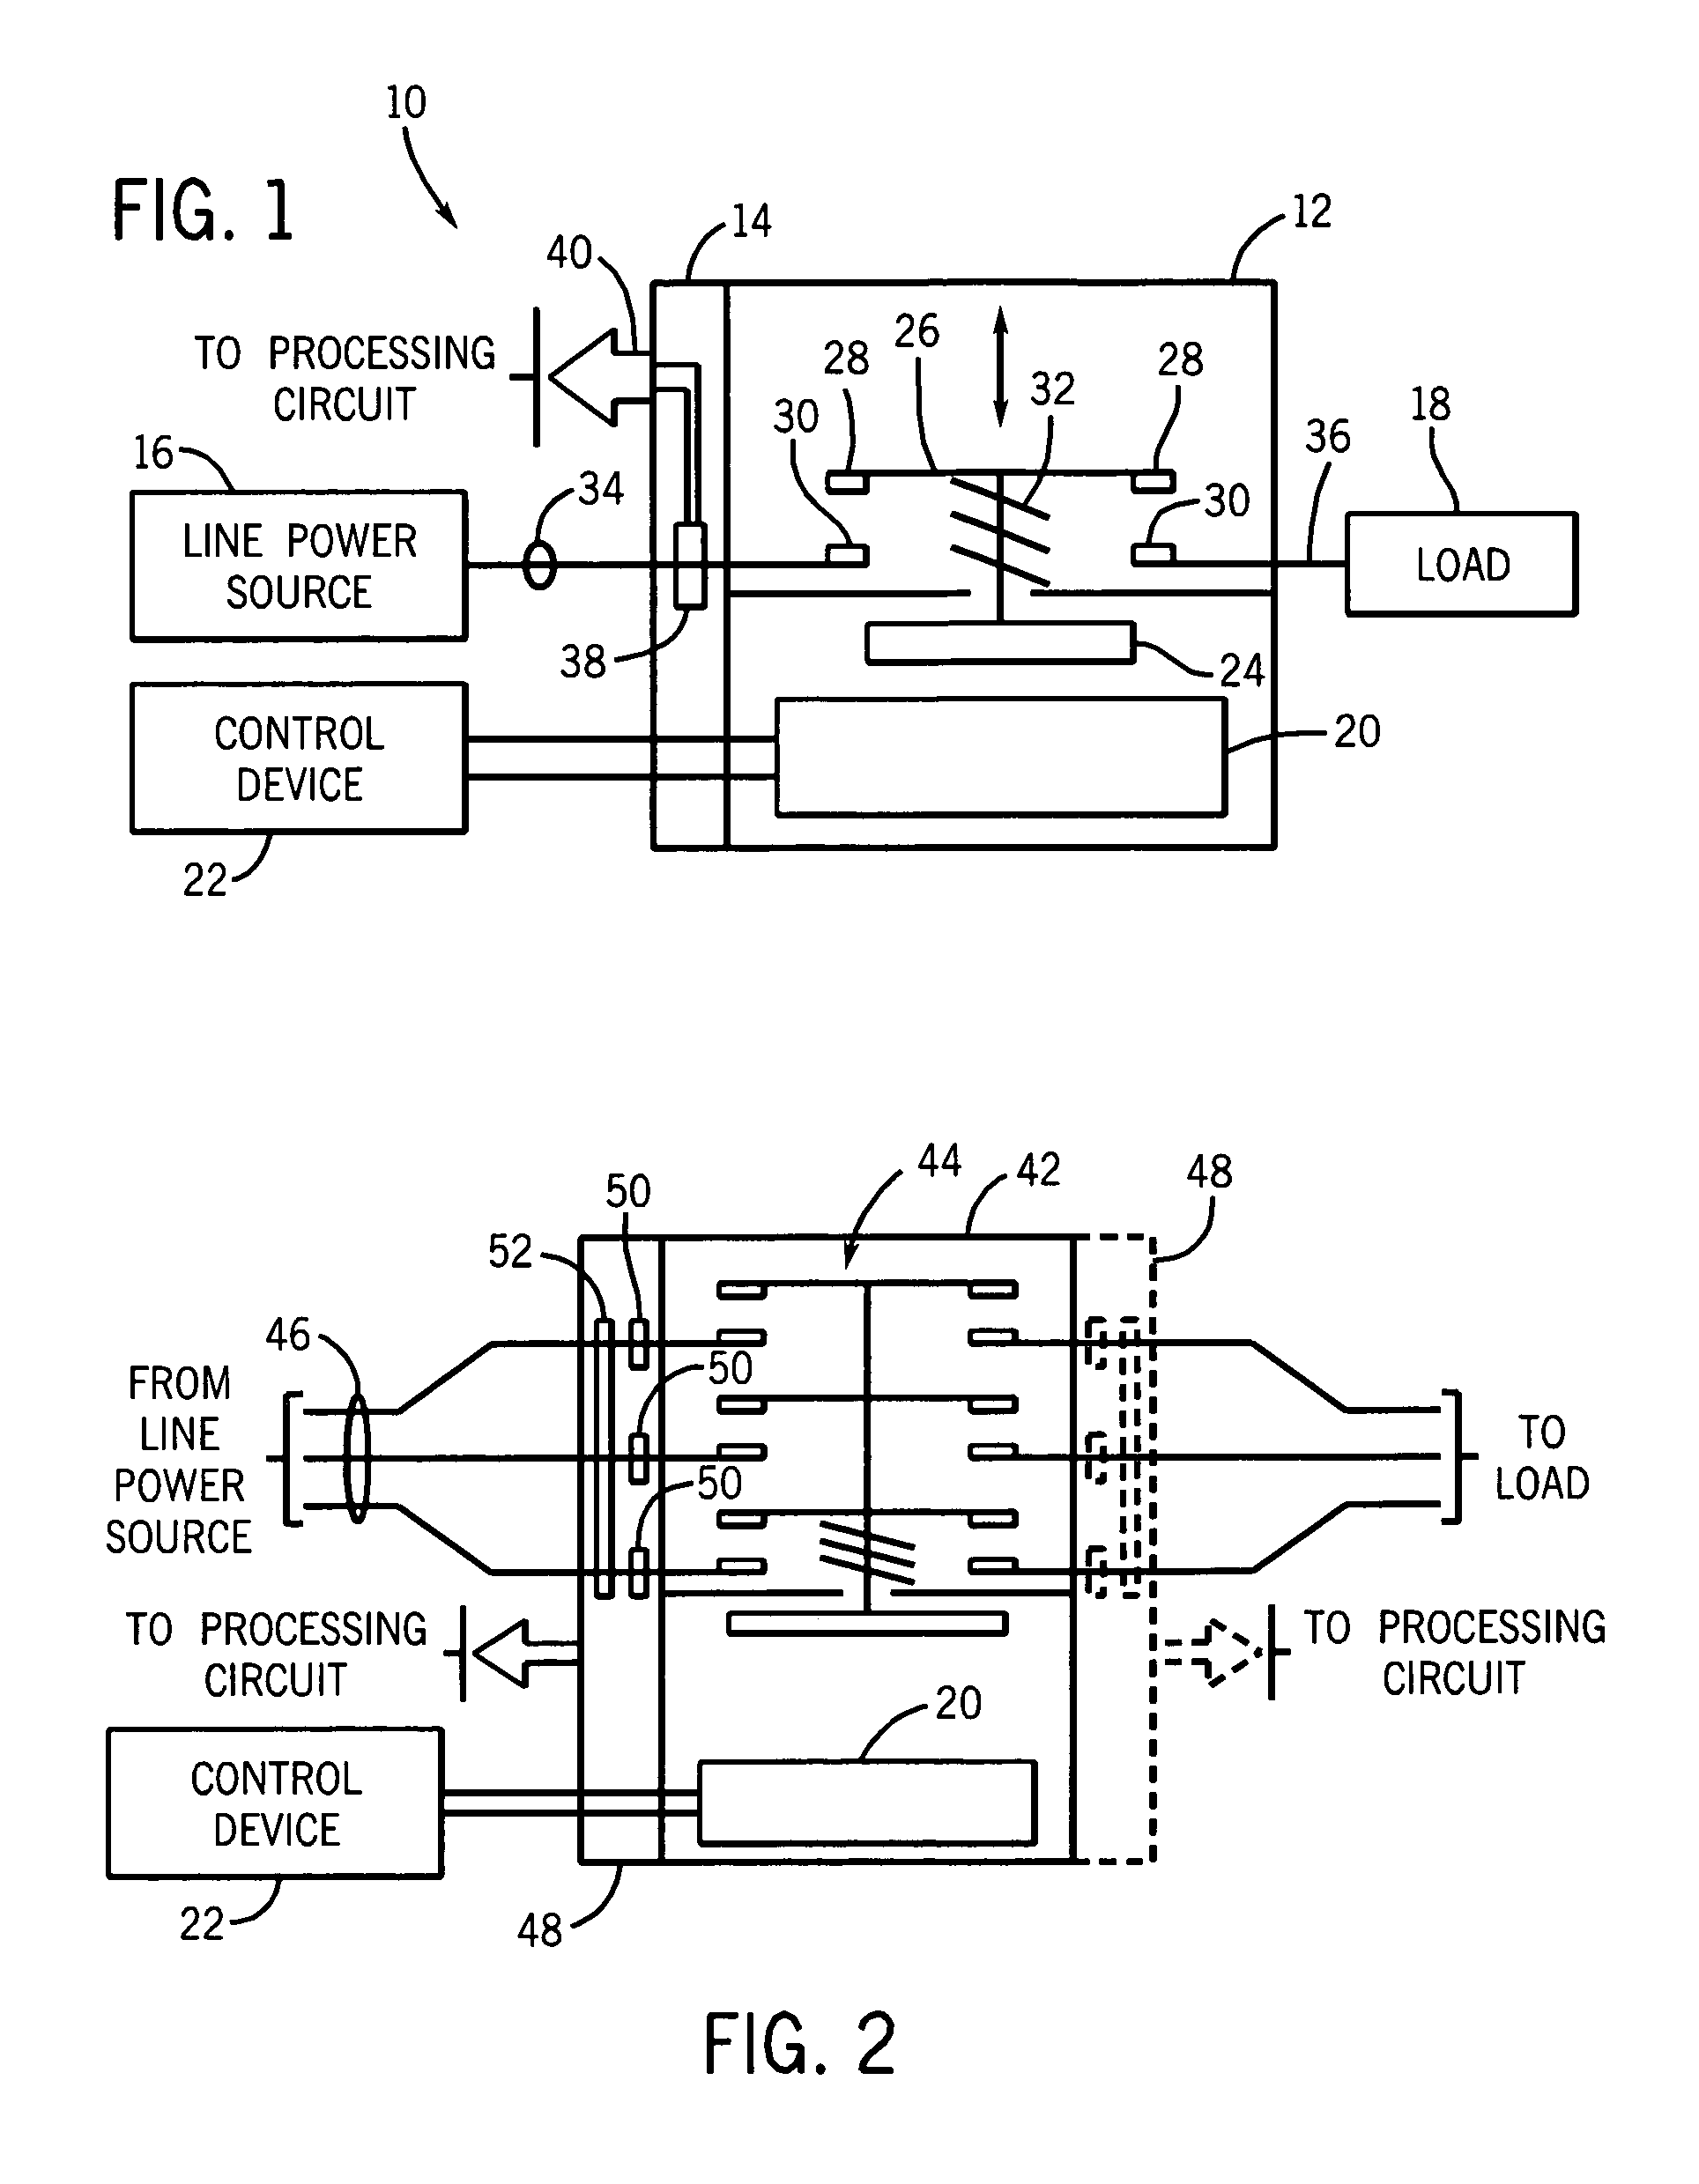 Electrical contractor current sensing system and method